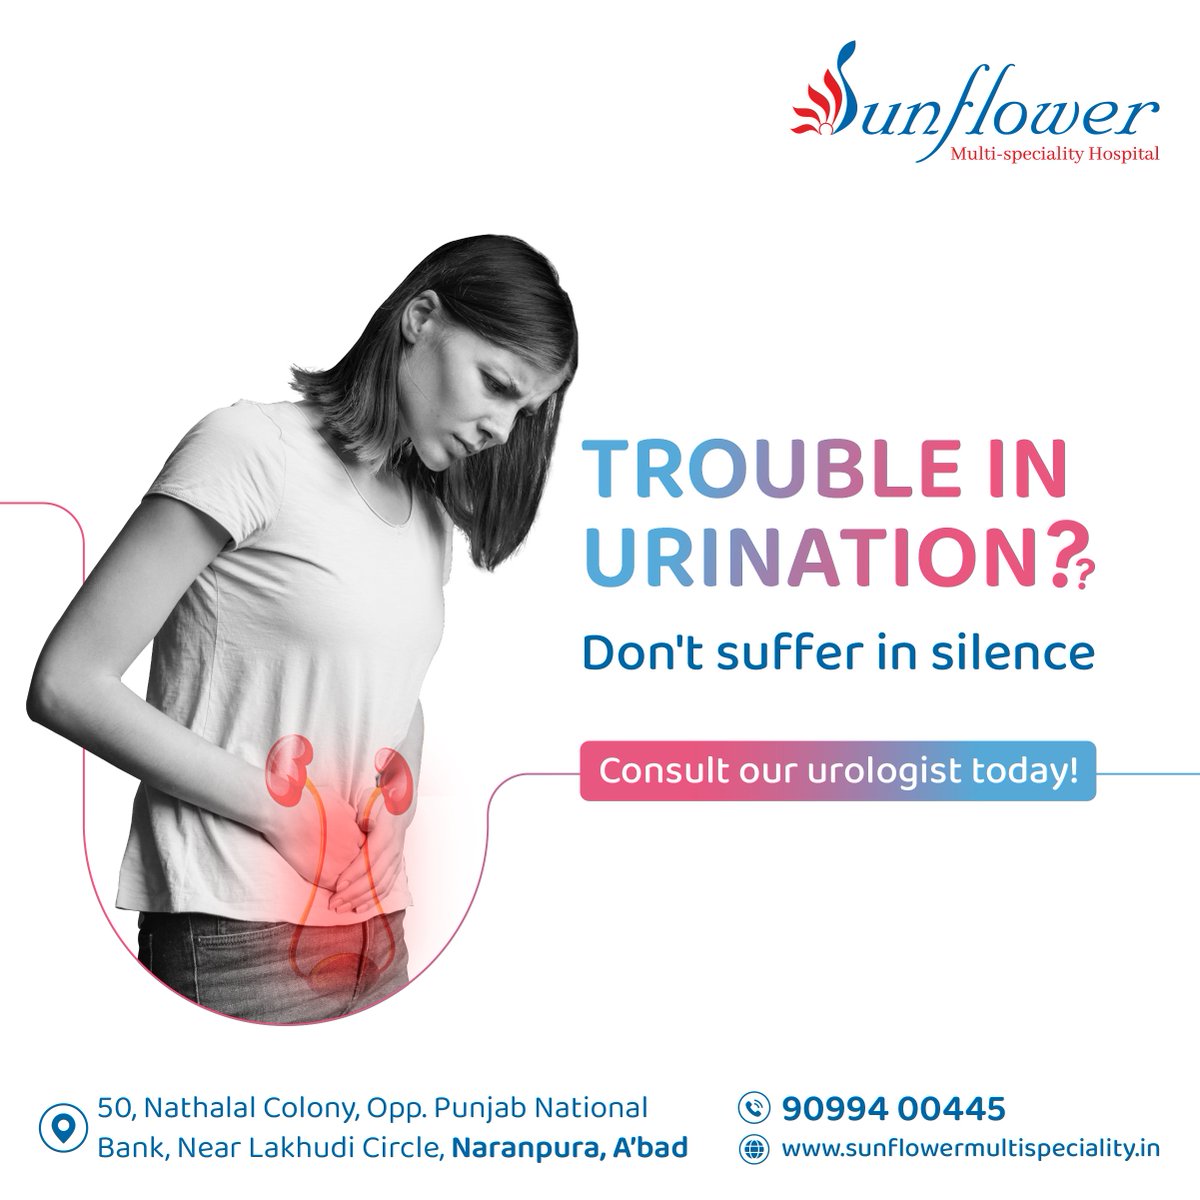 Uncomfortable urination? Silence isn't the solution. Seek relief with our expert #Urologist

Call: +91 90994 00445
Visit: sunflowermultispeciality.in/urologist/

#SunflowerMultispecialityHospital #Urinaryissues #Urinary #Urineproblem #urinarytractinfection #Naranpura #Ahmedabad